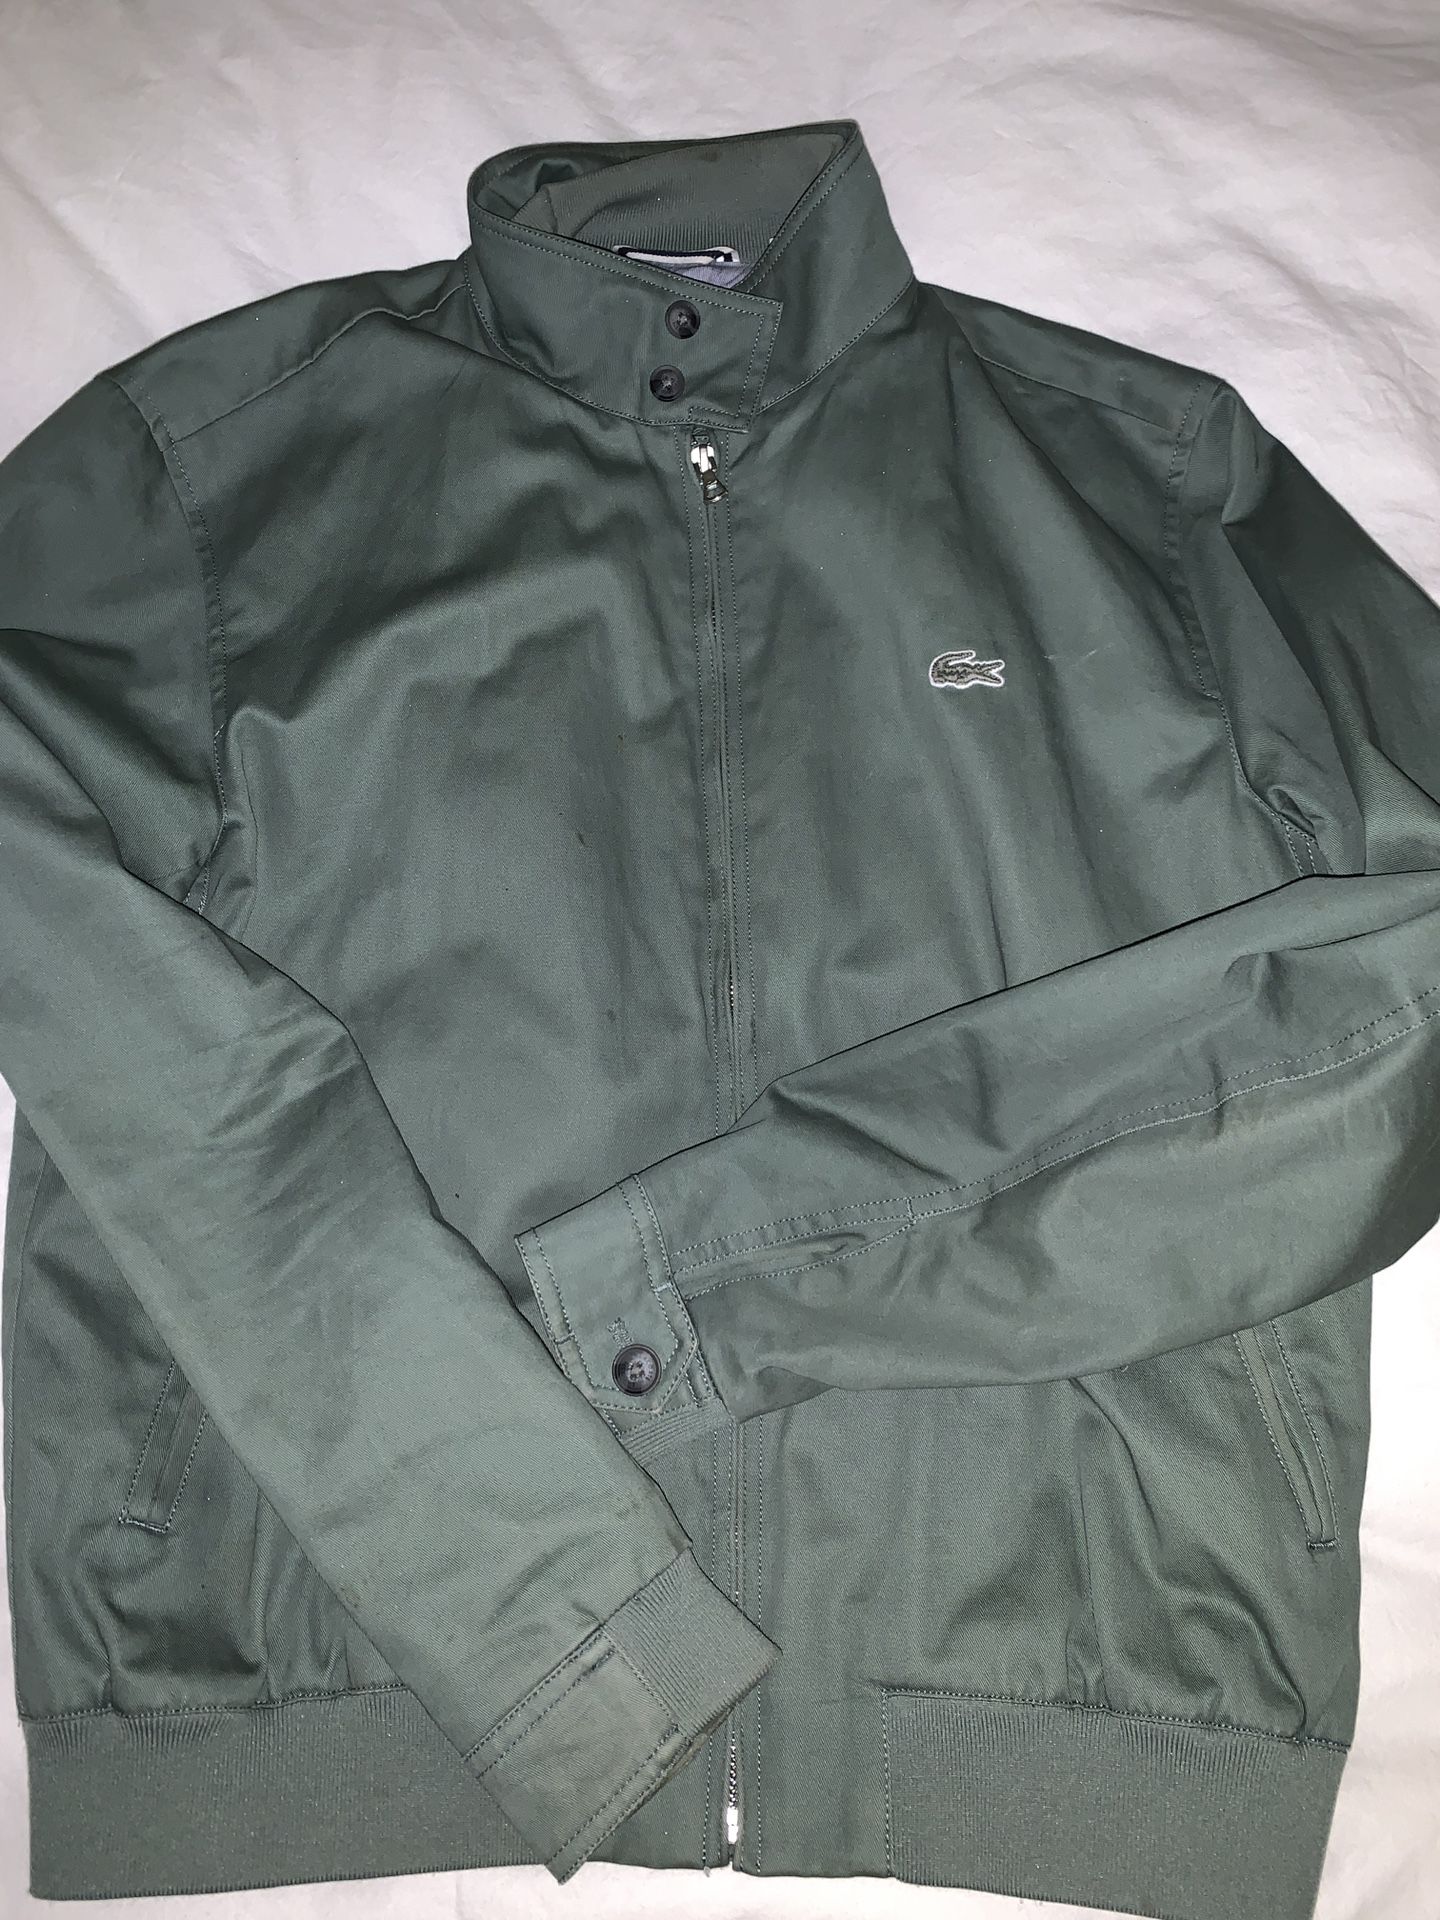 Lacoste Jacket for New NY - OfferUp